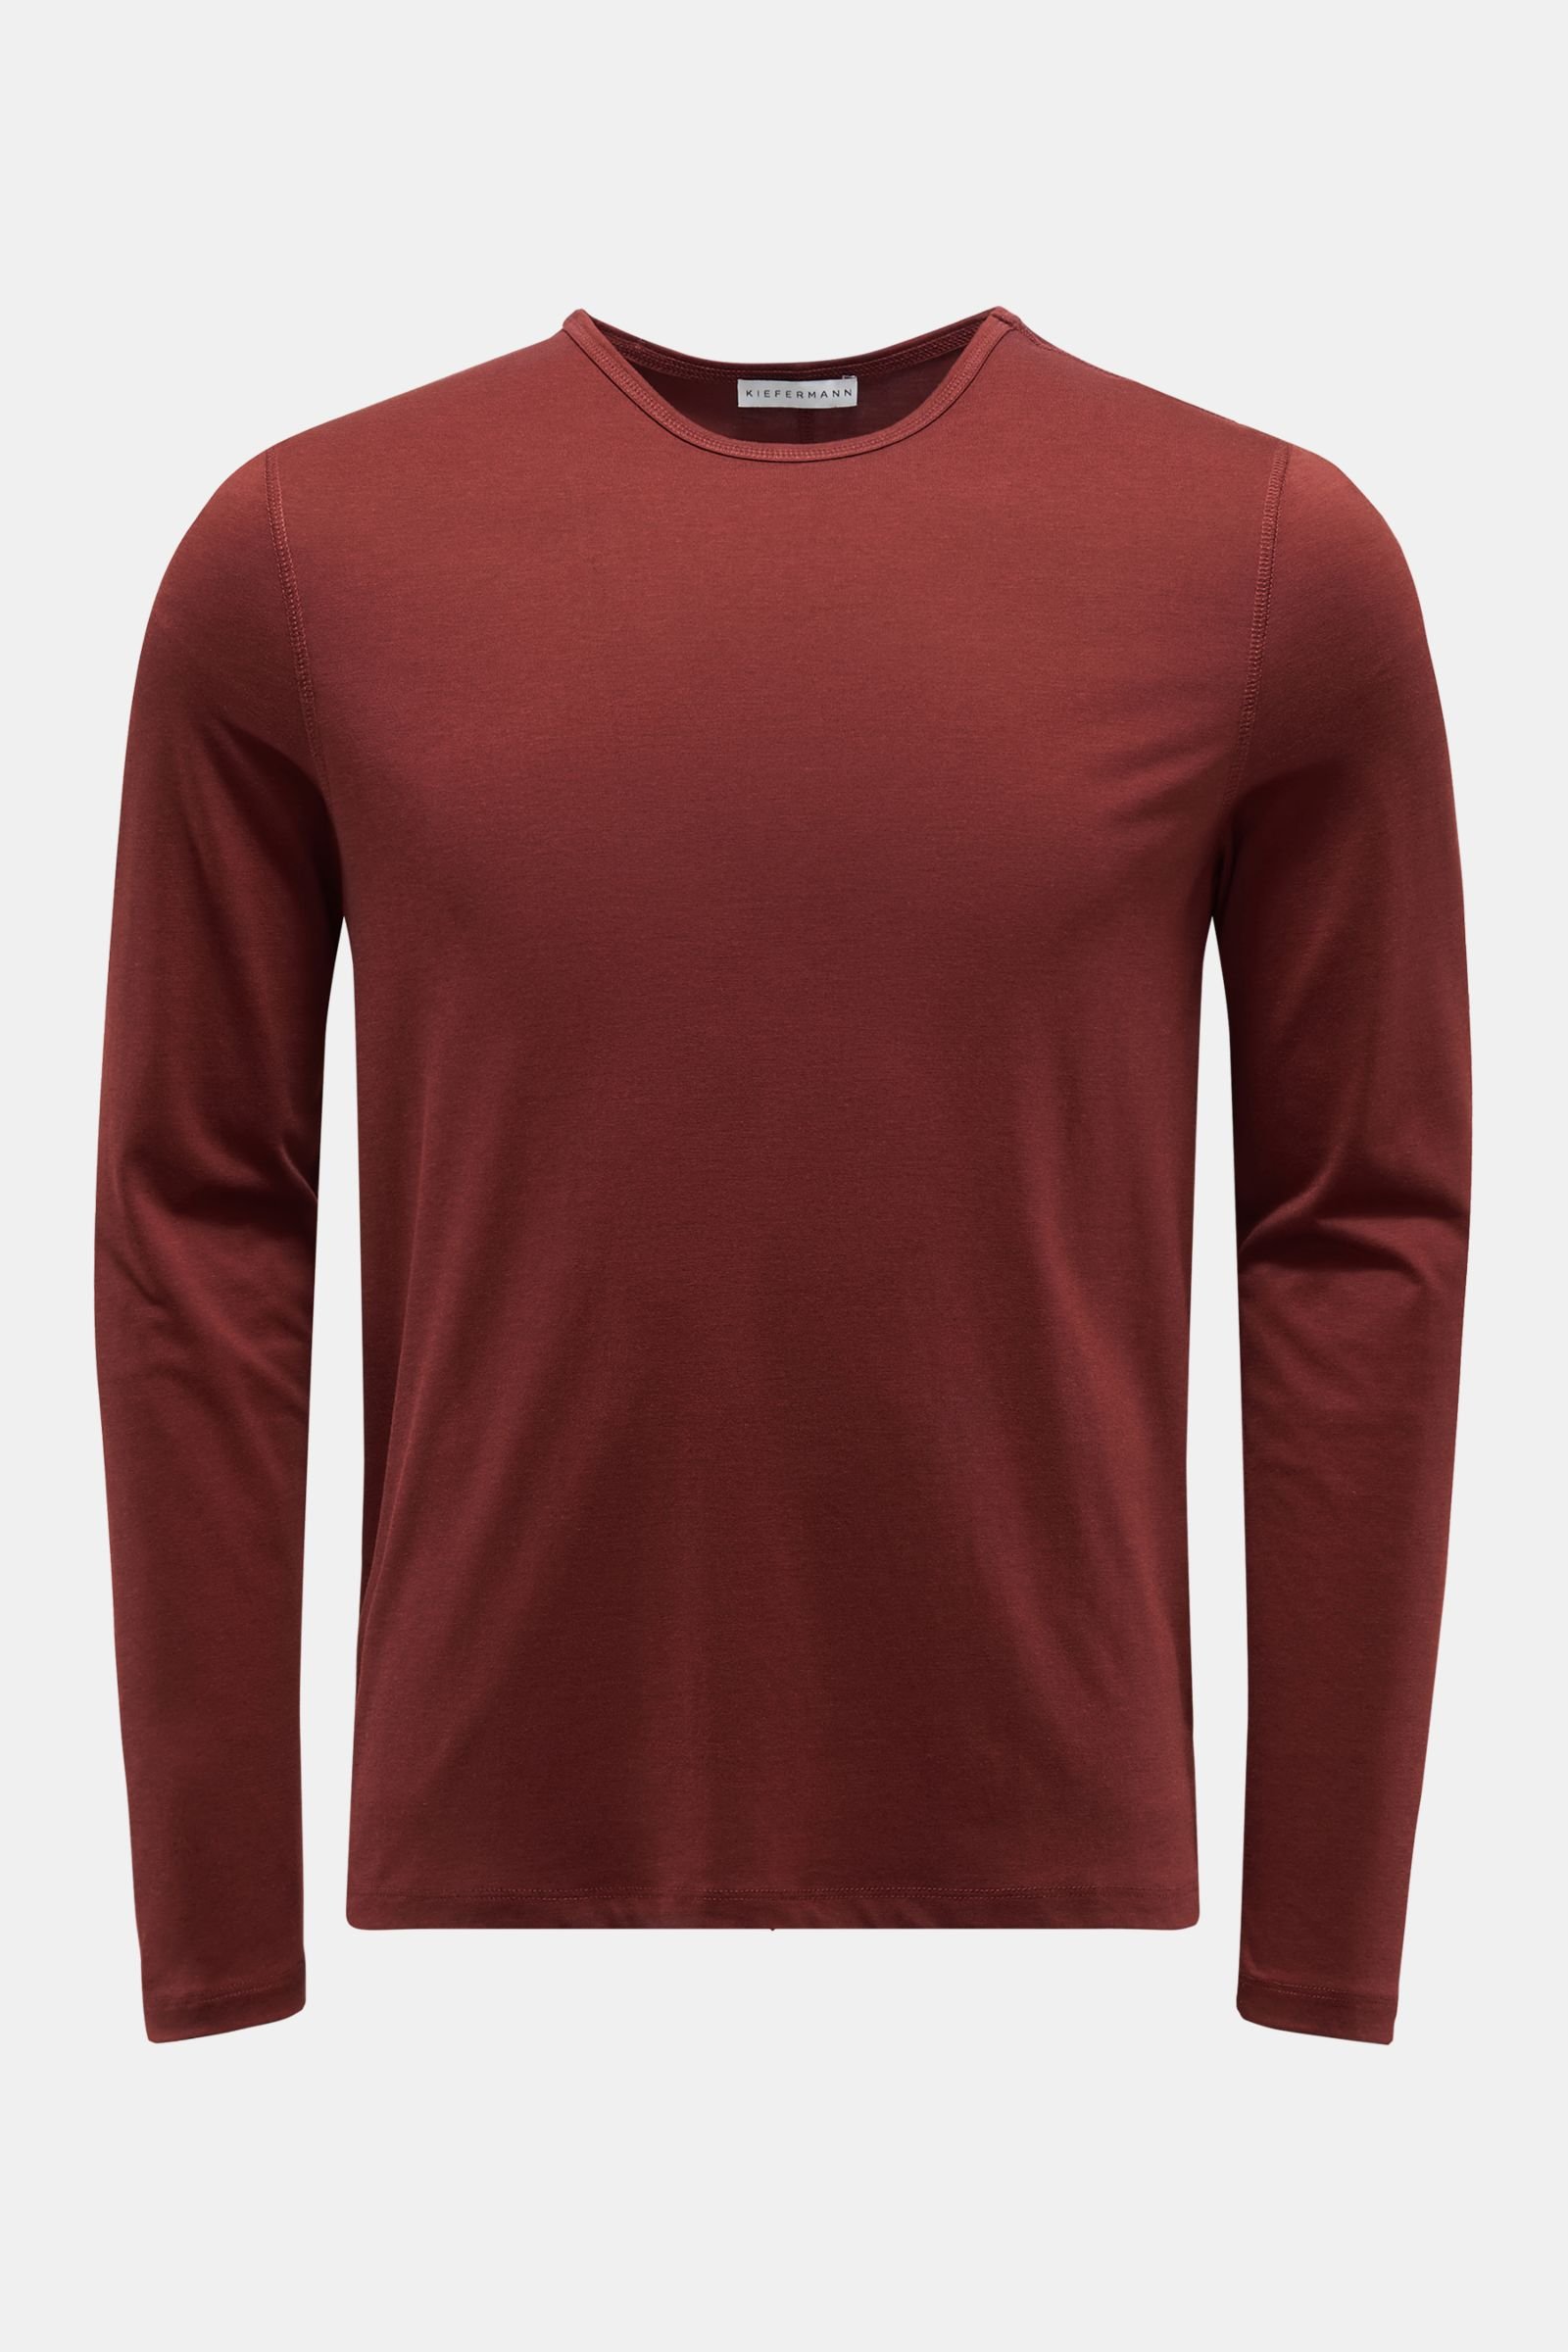 Crew neck long sleeve 'Henni' red brown